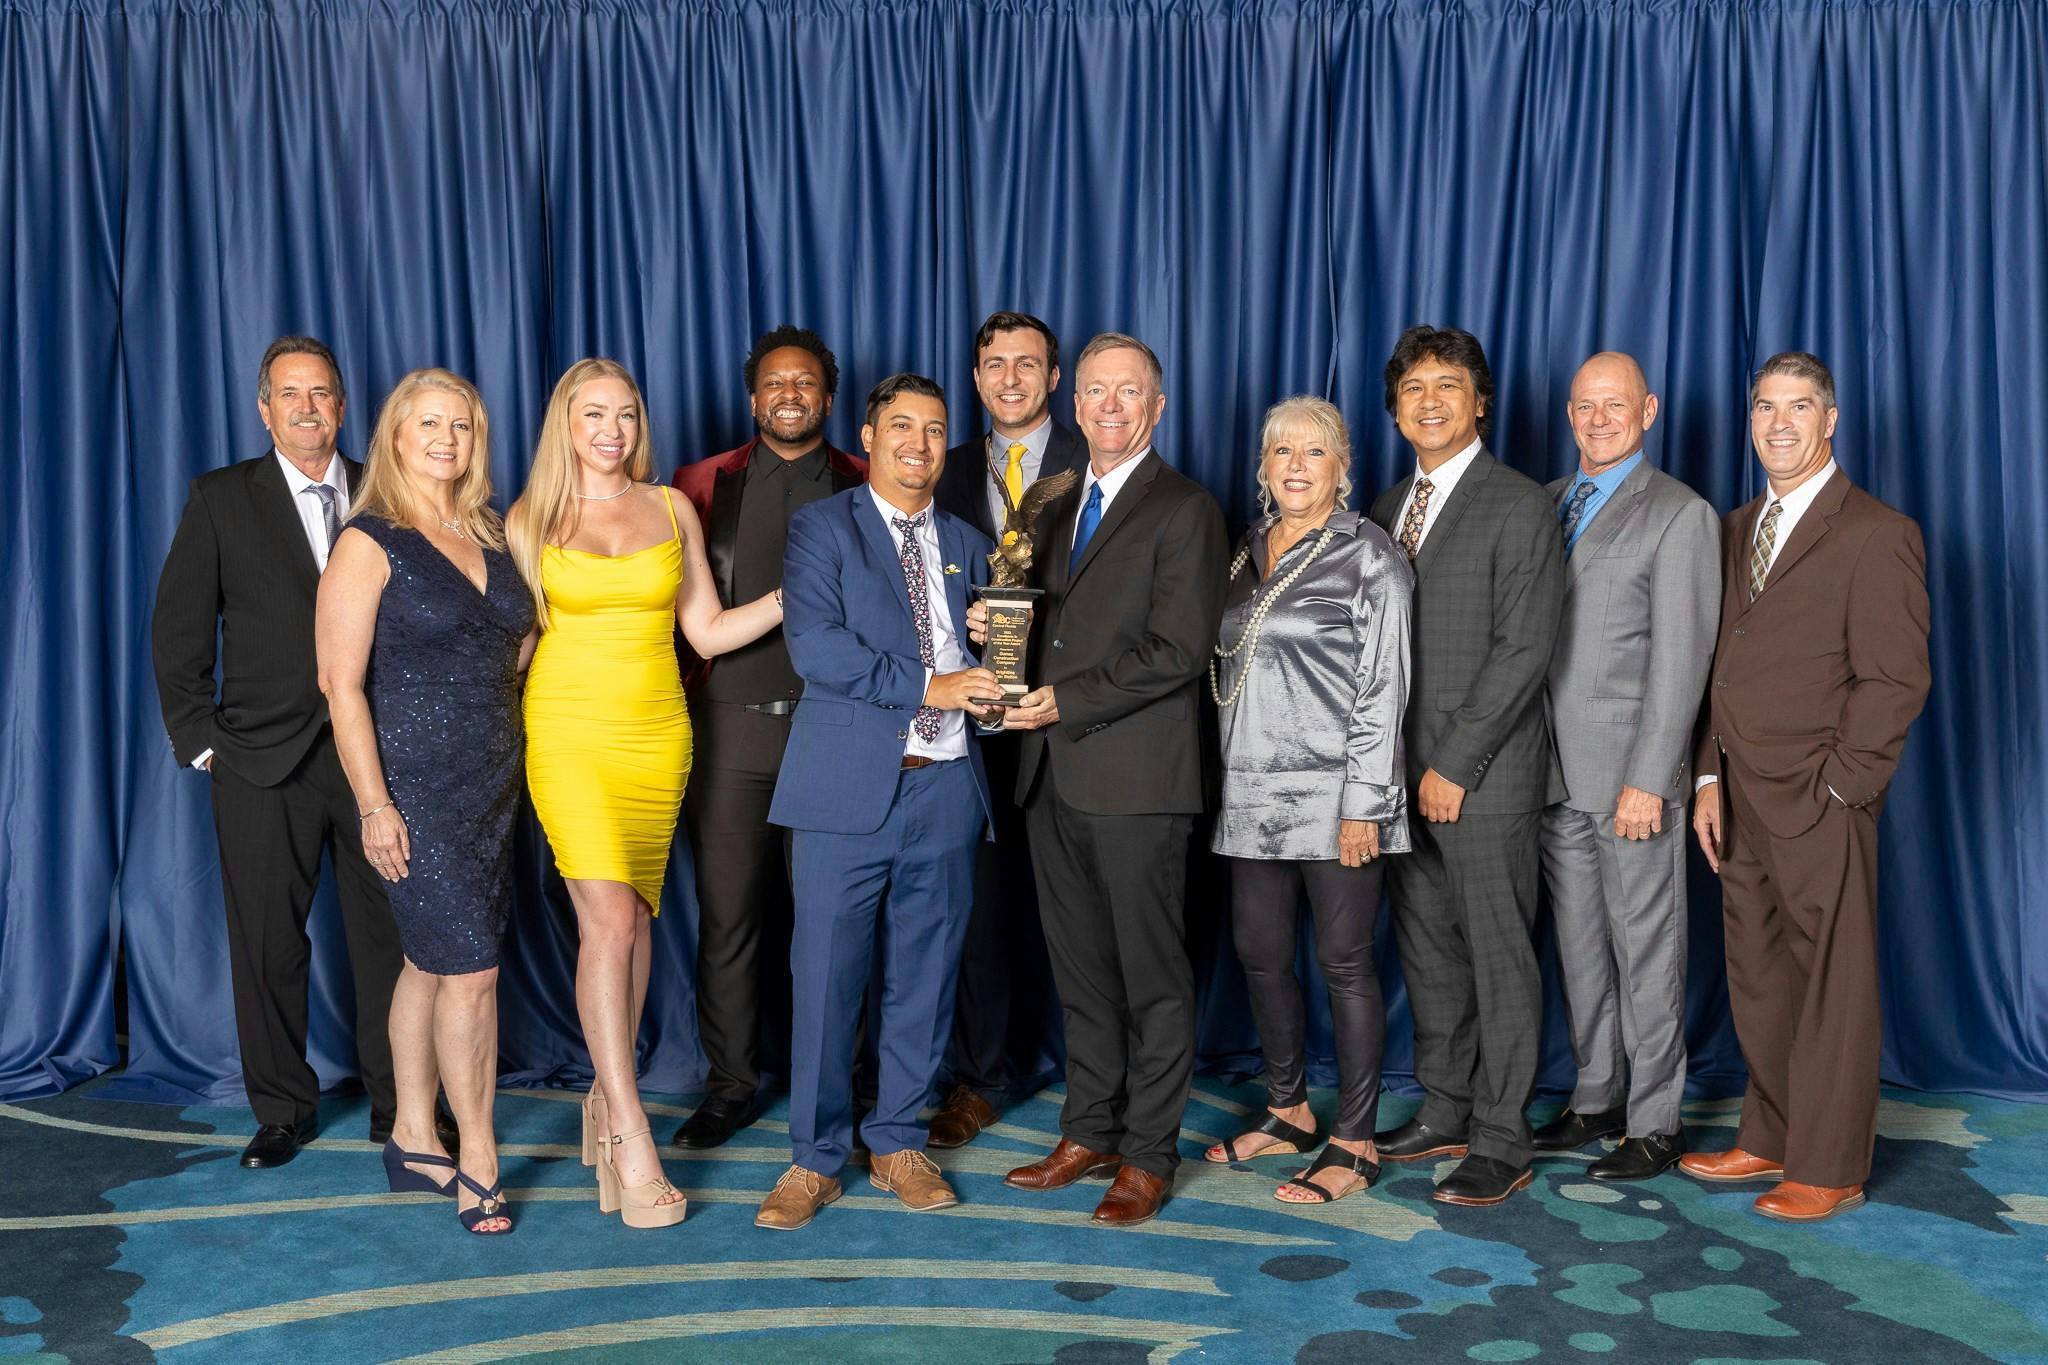 Brightline Station Receives ABC of Central Florida's Project of the Year Award